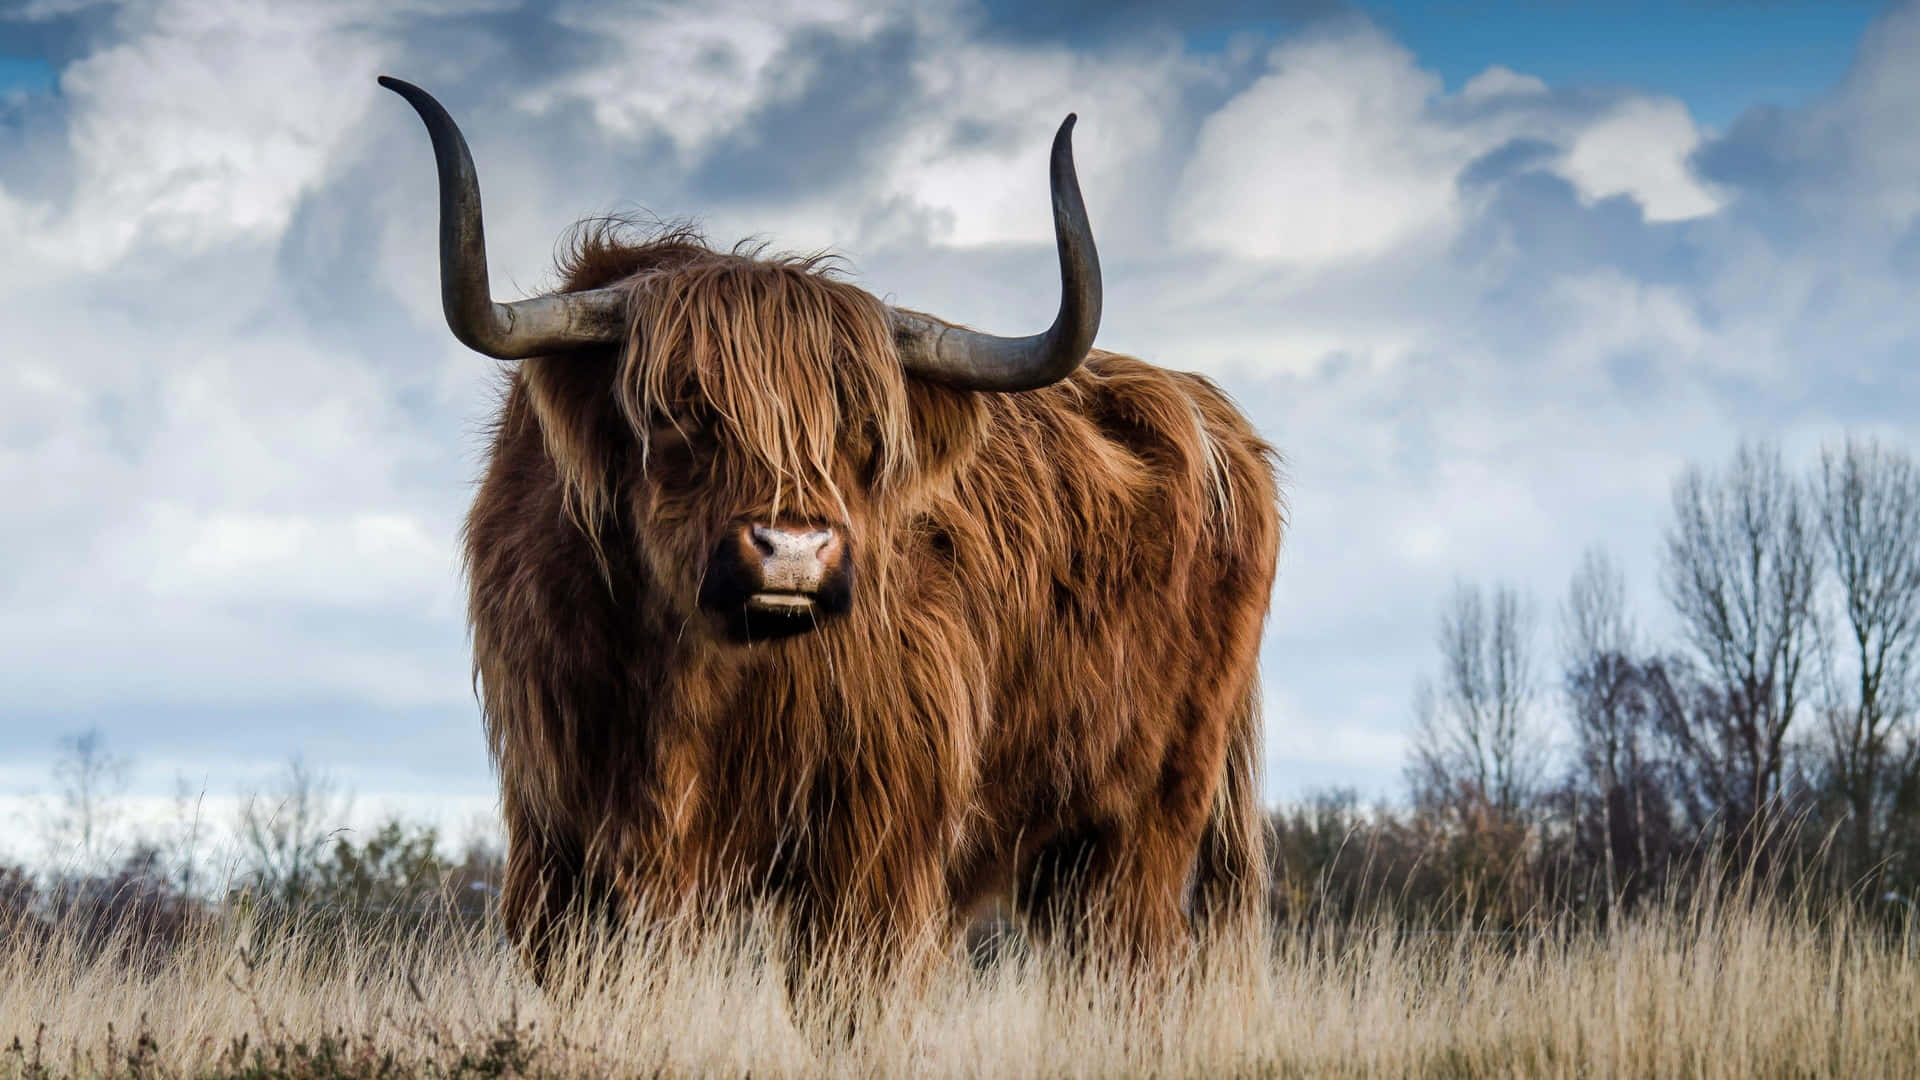 Majestic Highland Cow in a Serene Field